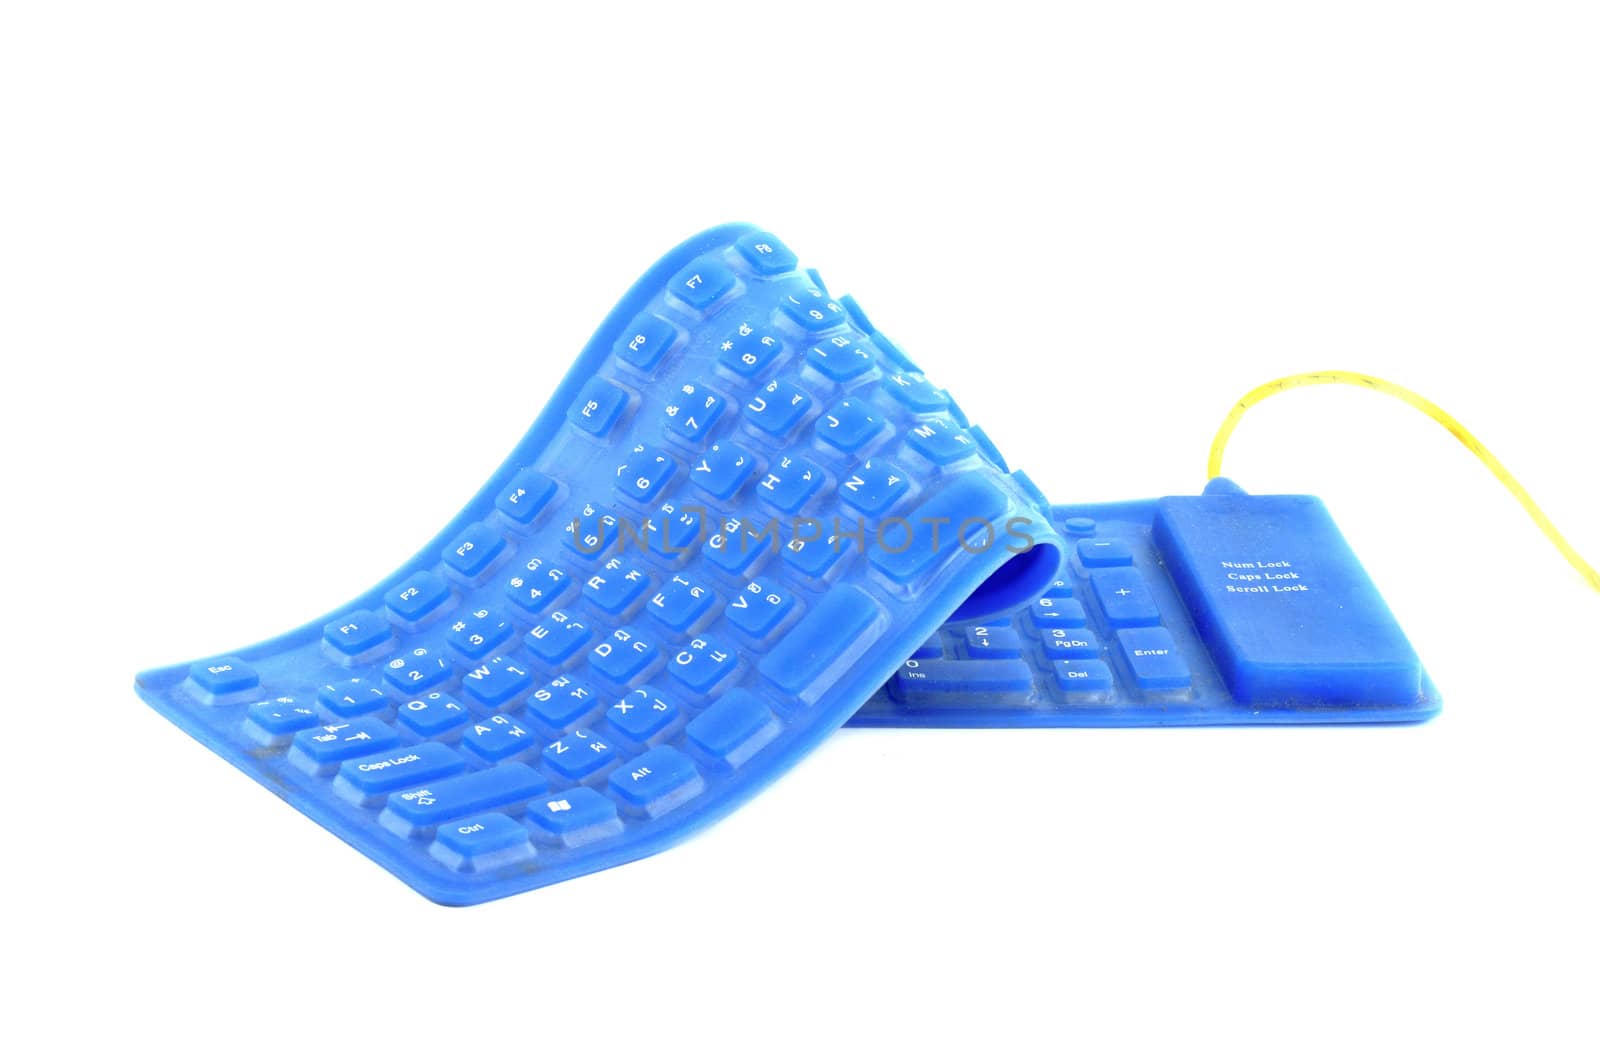 Isolated rubber portable and flexible PC keyboard